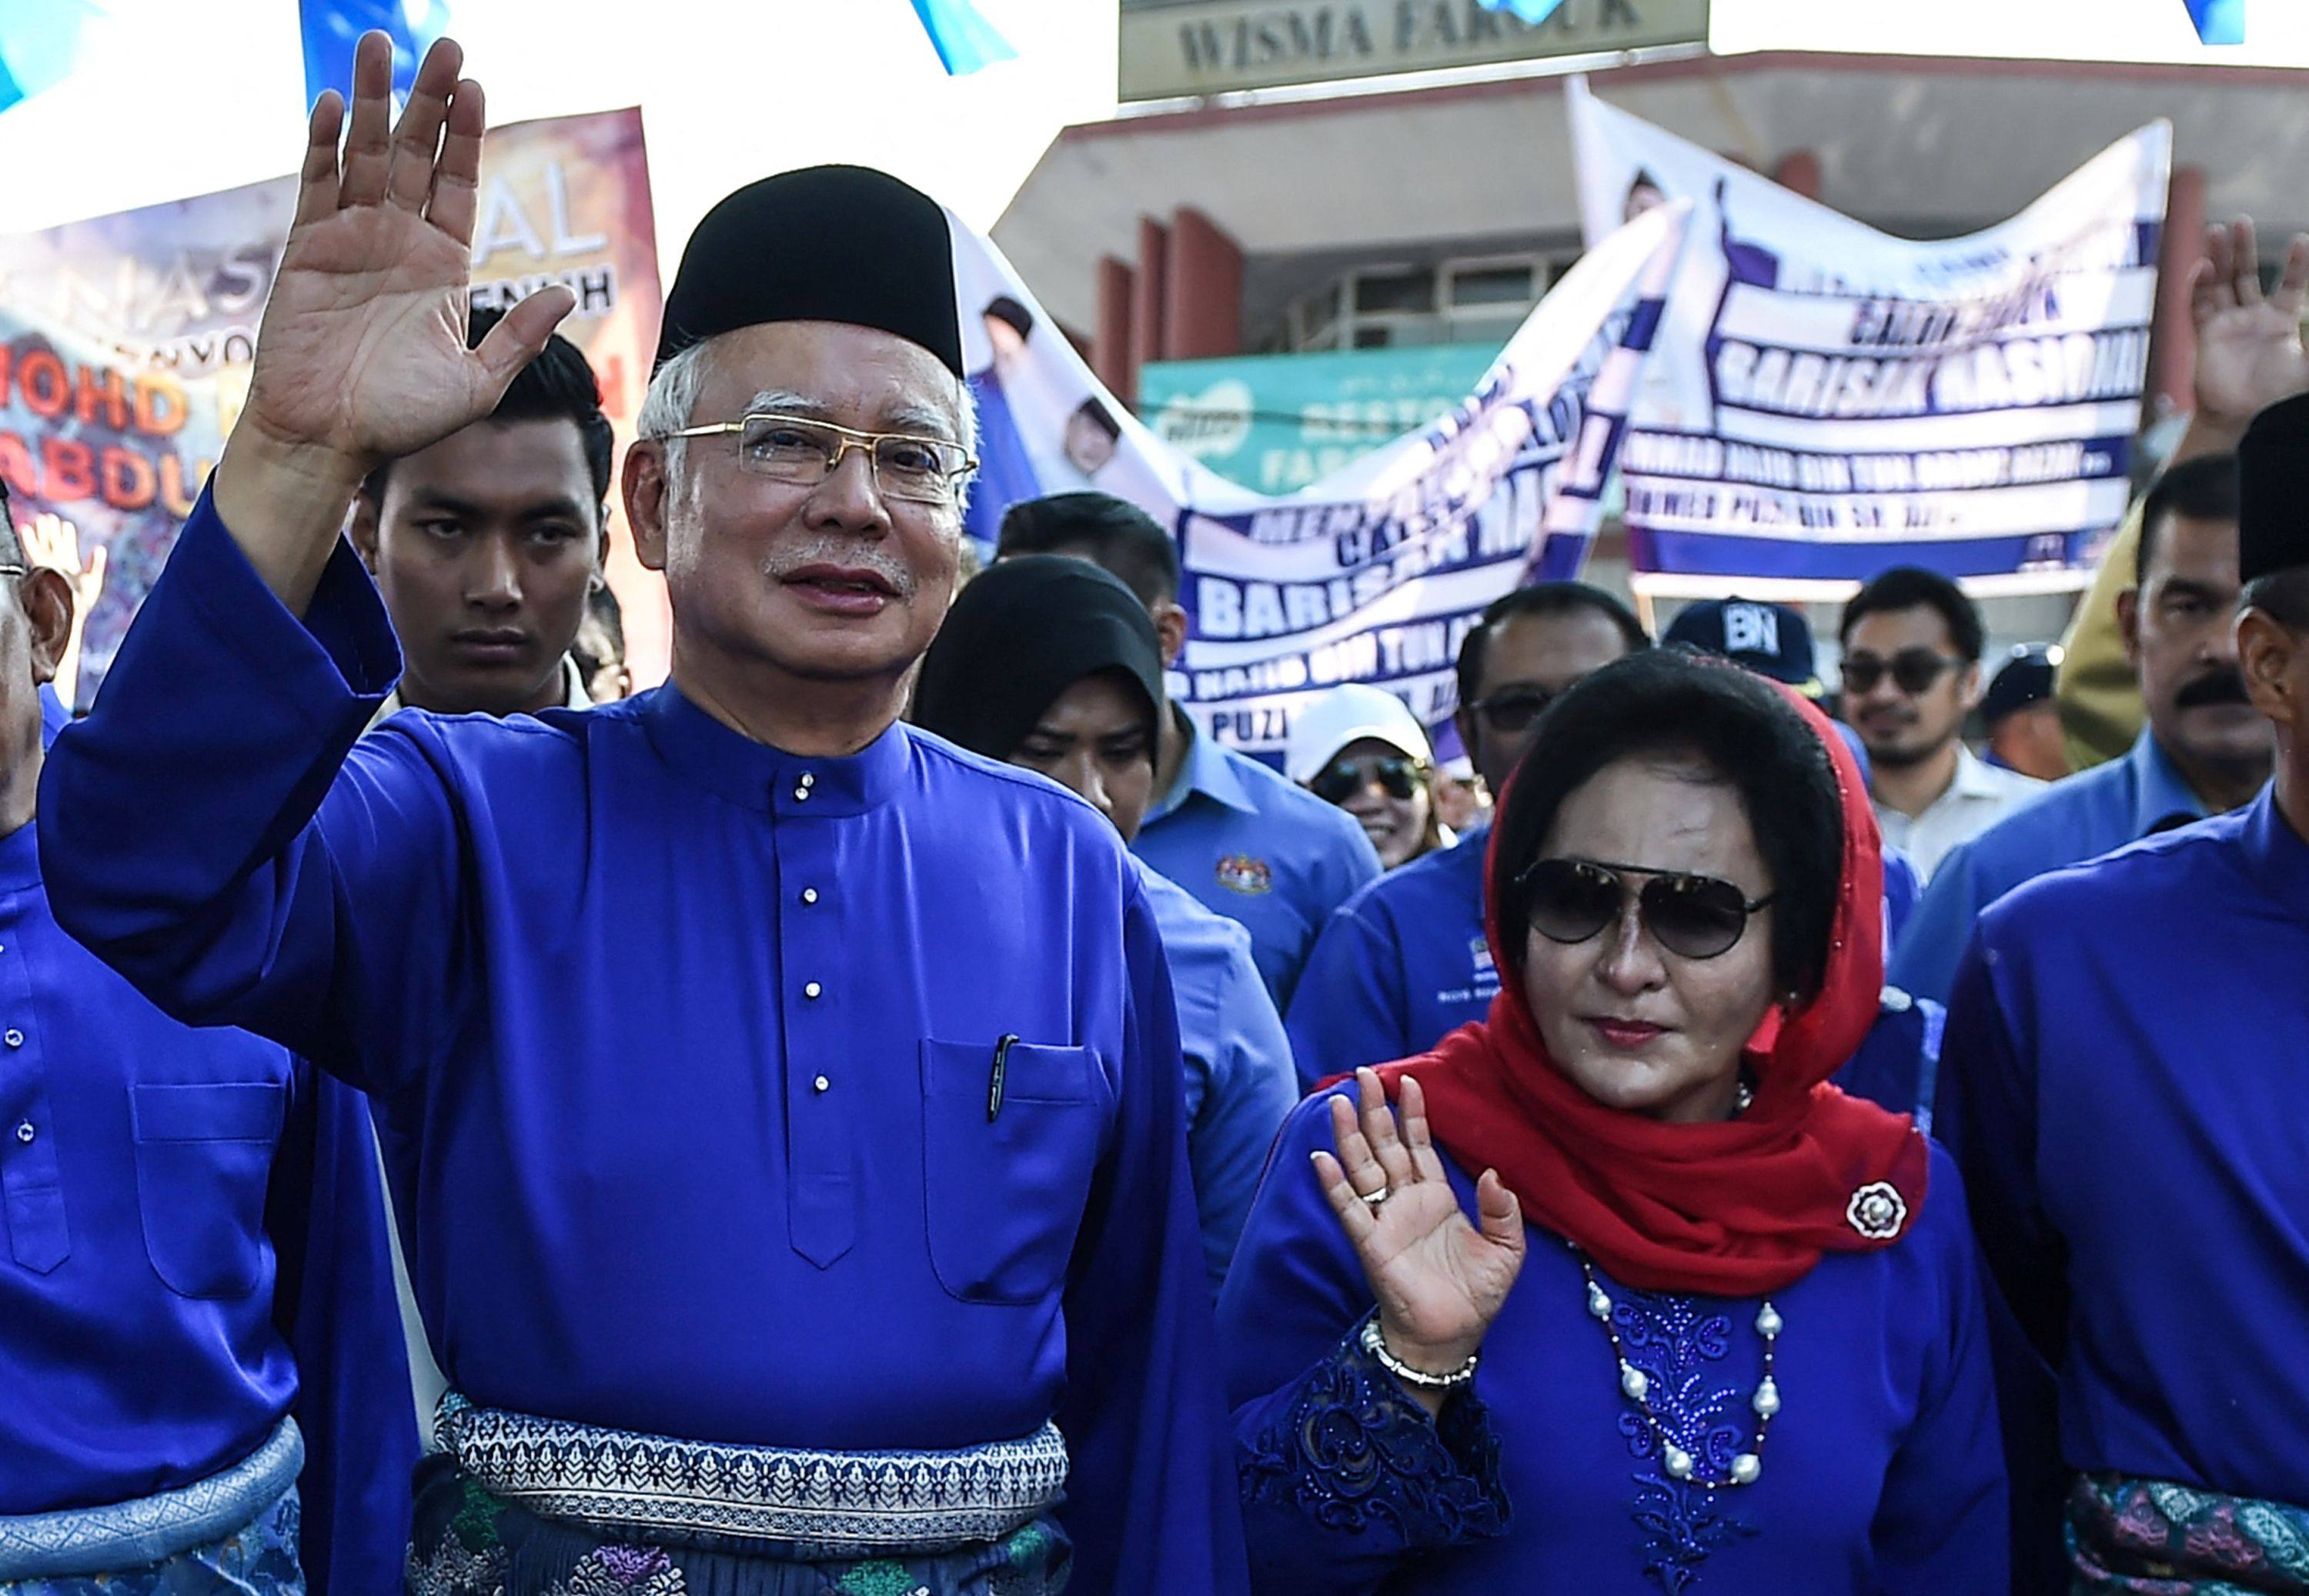 Malaysia’s then-Prime Minister Najib Razak and his wife Rosmah Mansor wave to supporters in 2018. Photo: AFP